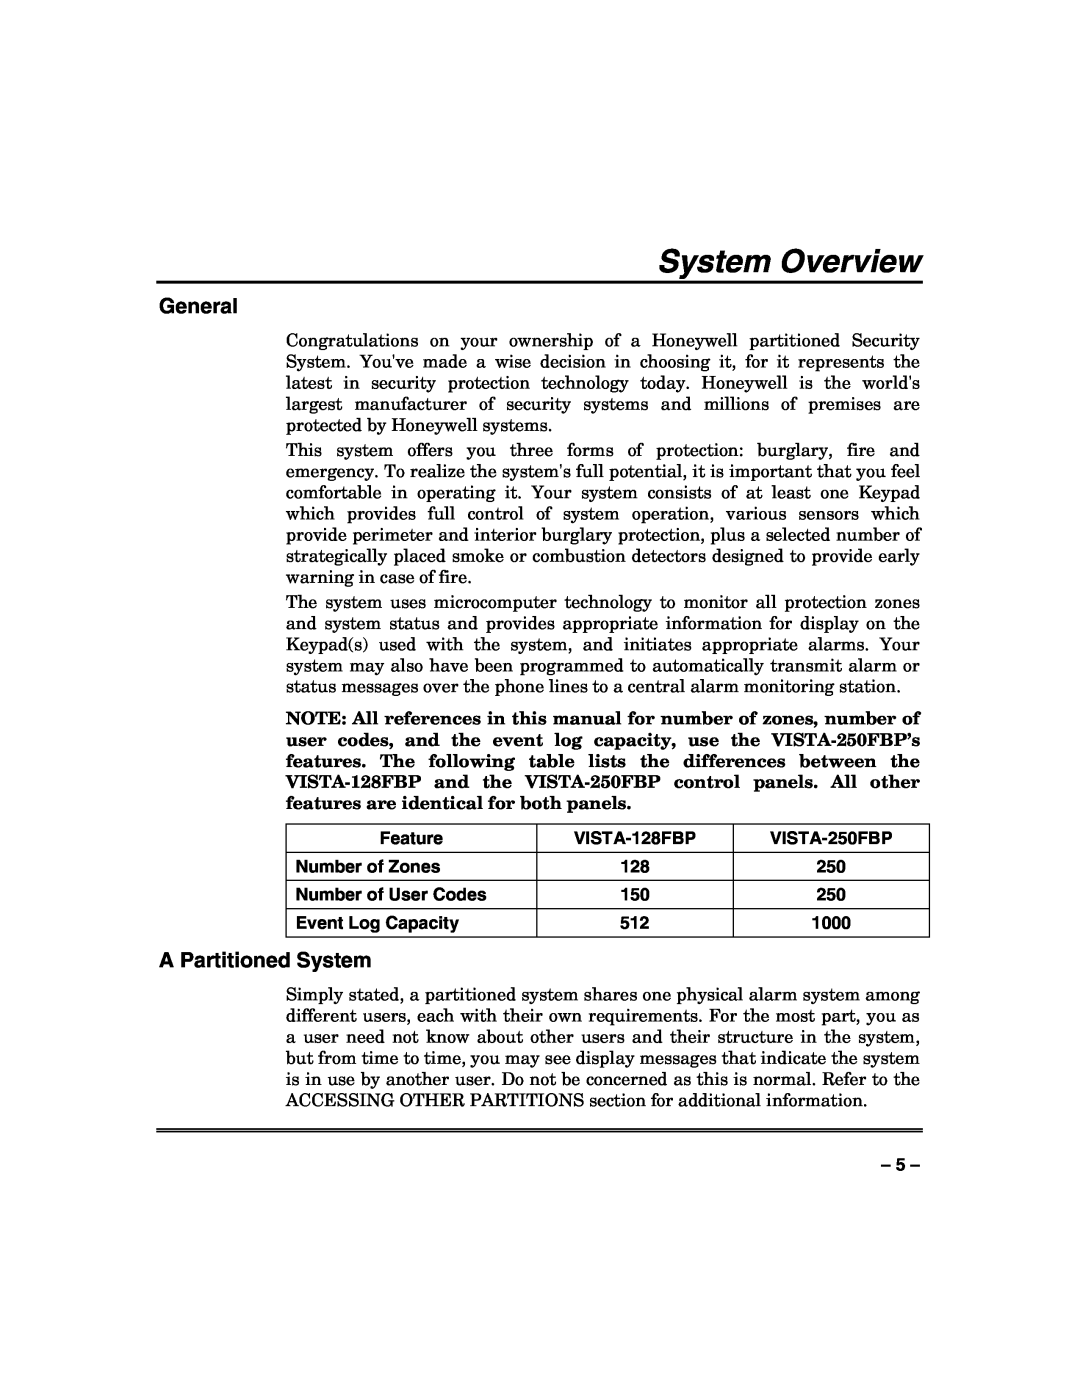 Honeywell VISTA-128FBP, VISTA-250FBP manual System Overview, General, A Partitioned System 